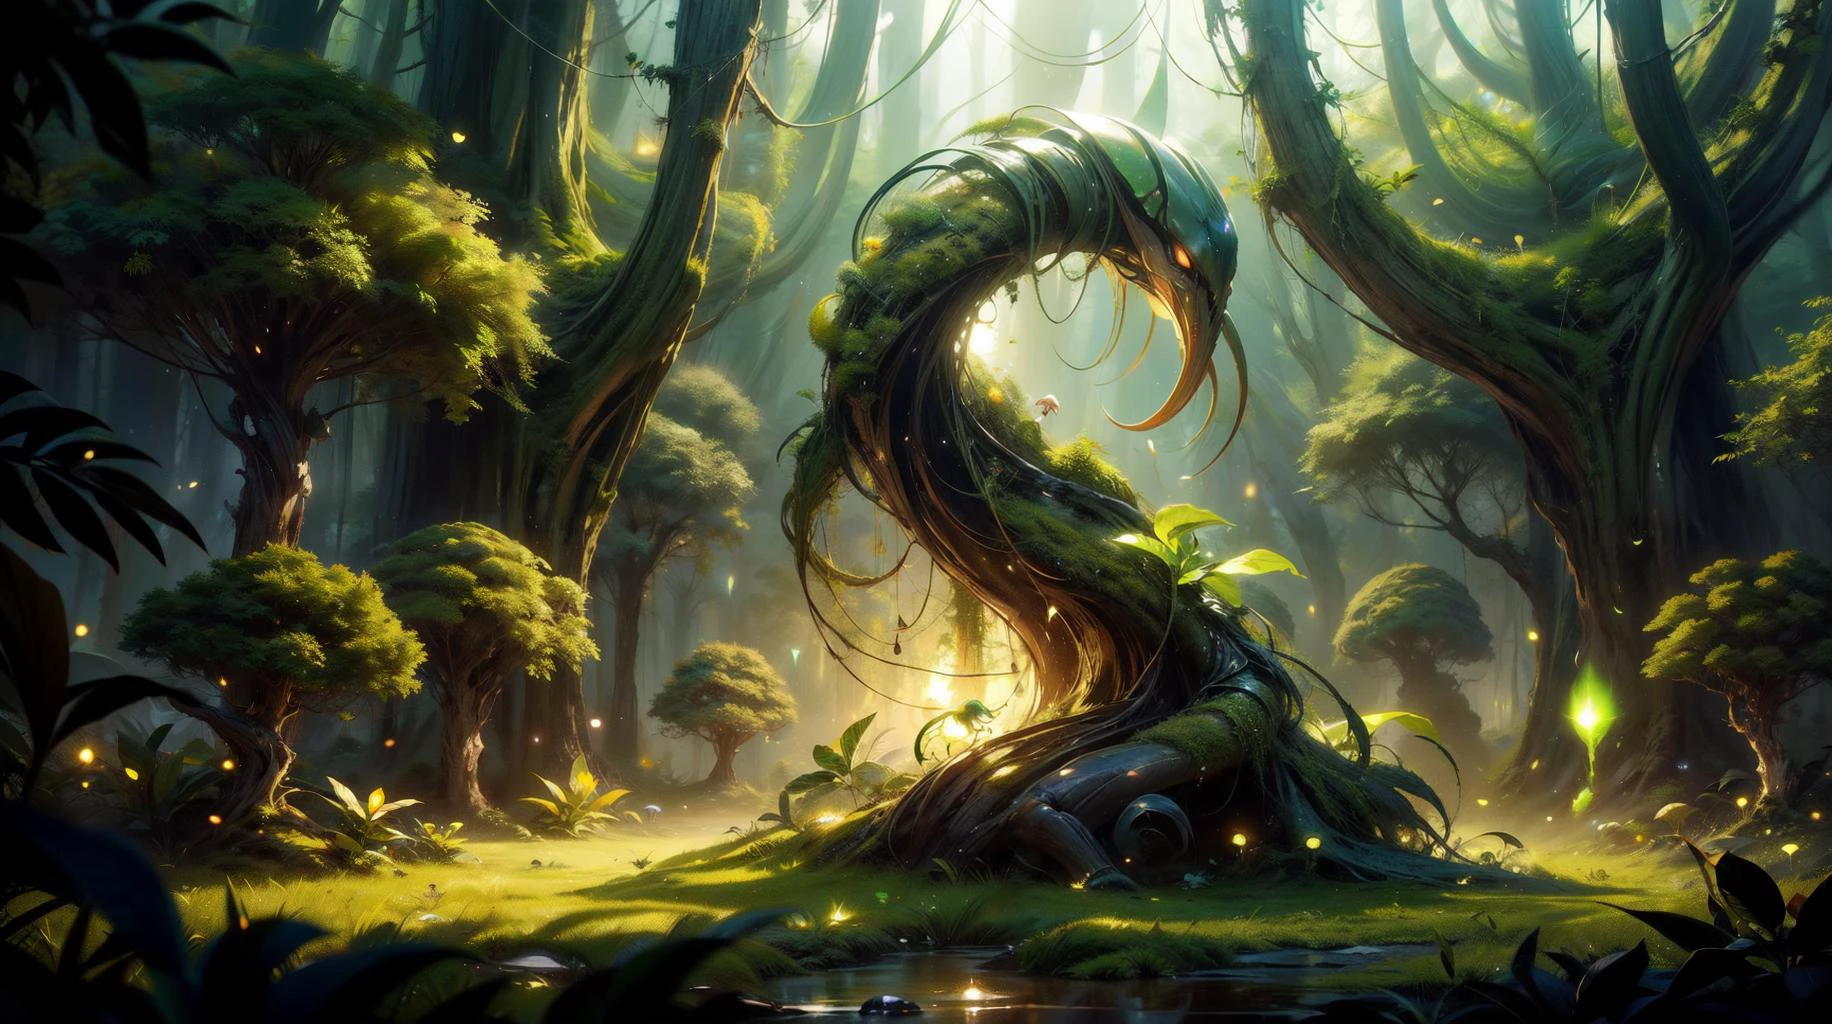 (masterpiece, high quality, full screen), [(full body:0.2)::0.1] (photo of a giant vegetal [magical being:tree creature:0.6] Ascending in a lush forest:1.4), ([Insectoid:Crustacean:0.4] with many body shape:1.6), (Tangled Fluorescent skin:1.3), (one Gamboge Raceme flowers on the head:1.1), ([practicing Plant Growth Manipulation|Sitting with legs crossed, appearing relaxed and open-minded pose]:1.3), (Blue Hour lighting:1), naturemagic, MAGICAL ENERGY, U61yCre4ture, (Full body Shot, Shallow Focus Shot, Low Angle Shot:[1.2:0.5:0.1]), heavily detailed, (asymmetric composition:1.5), (sharp focus), fakemtg